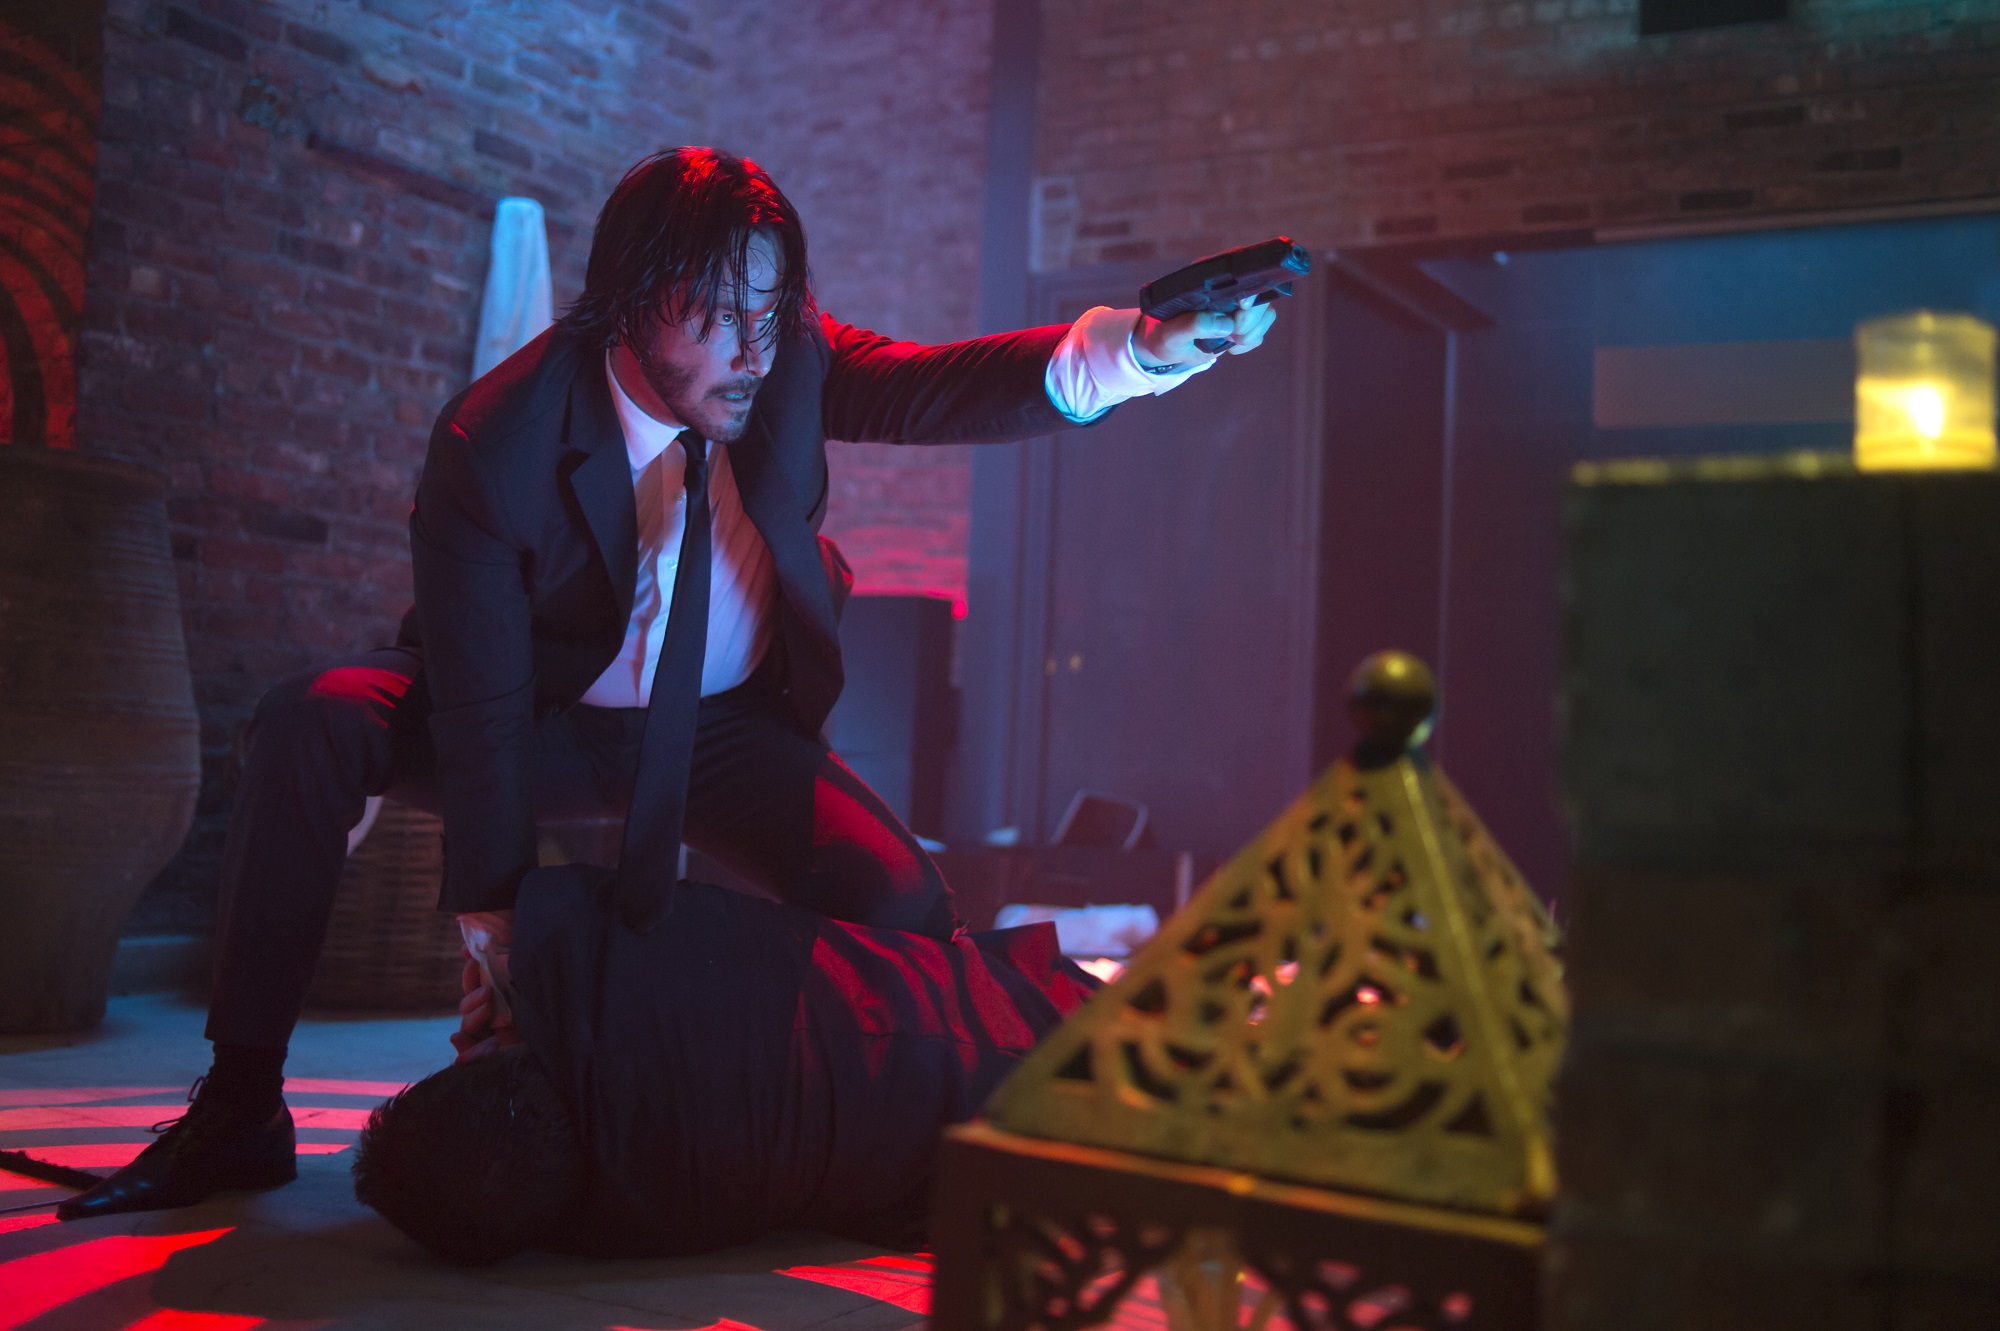 John Wick crouched and pointing a gun